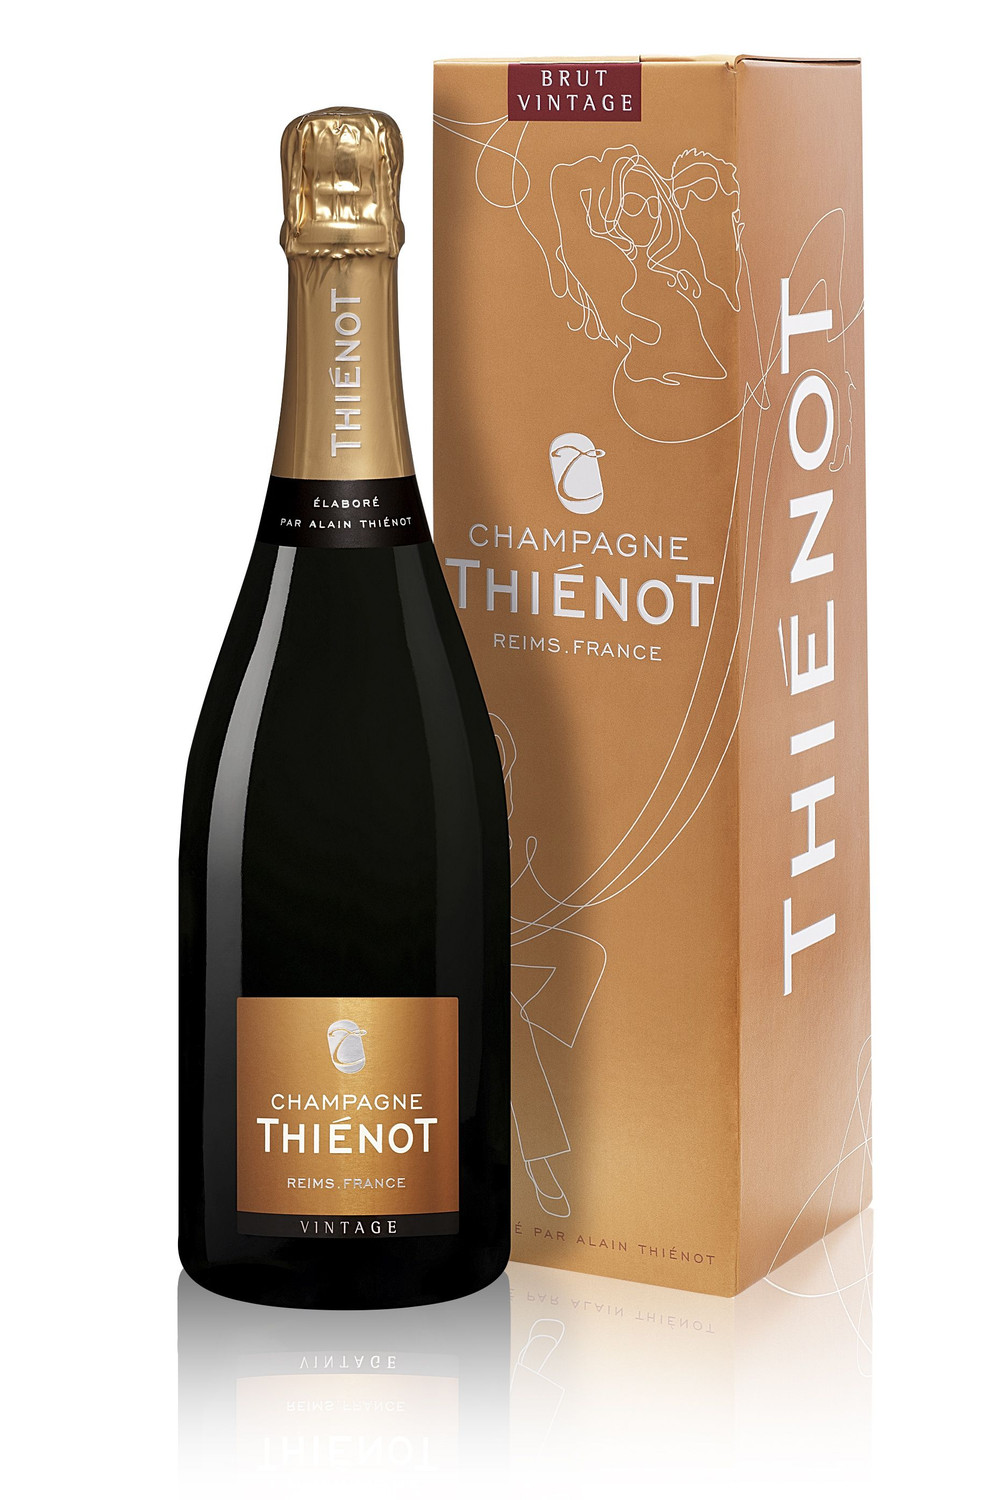 Thienot Brut Vintage 2012 In Gift Box (75cl) - Champagne One